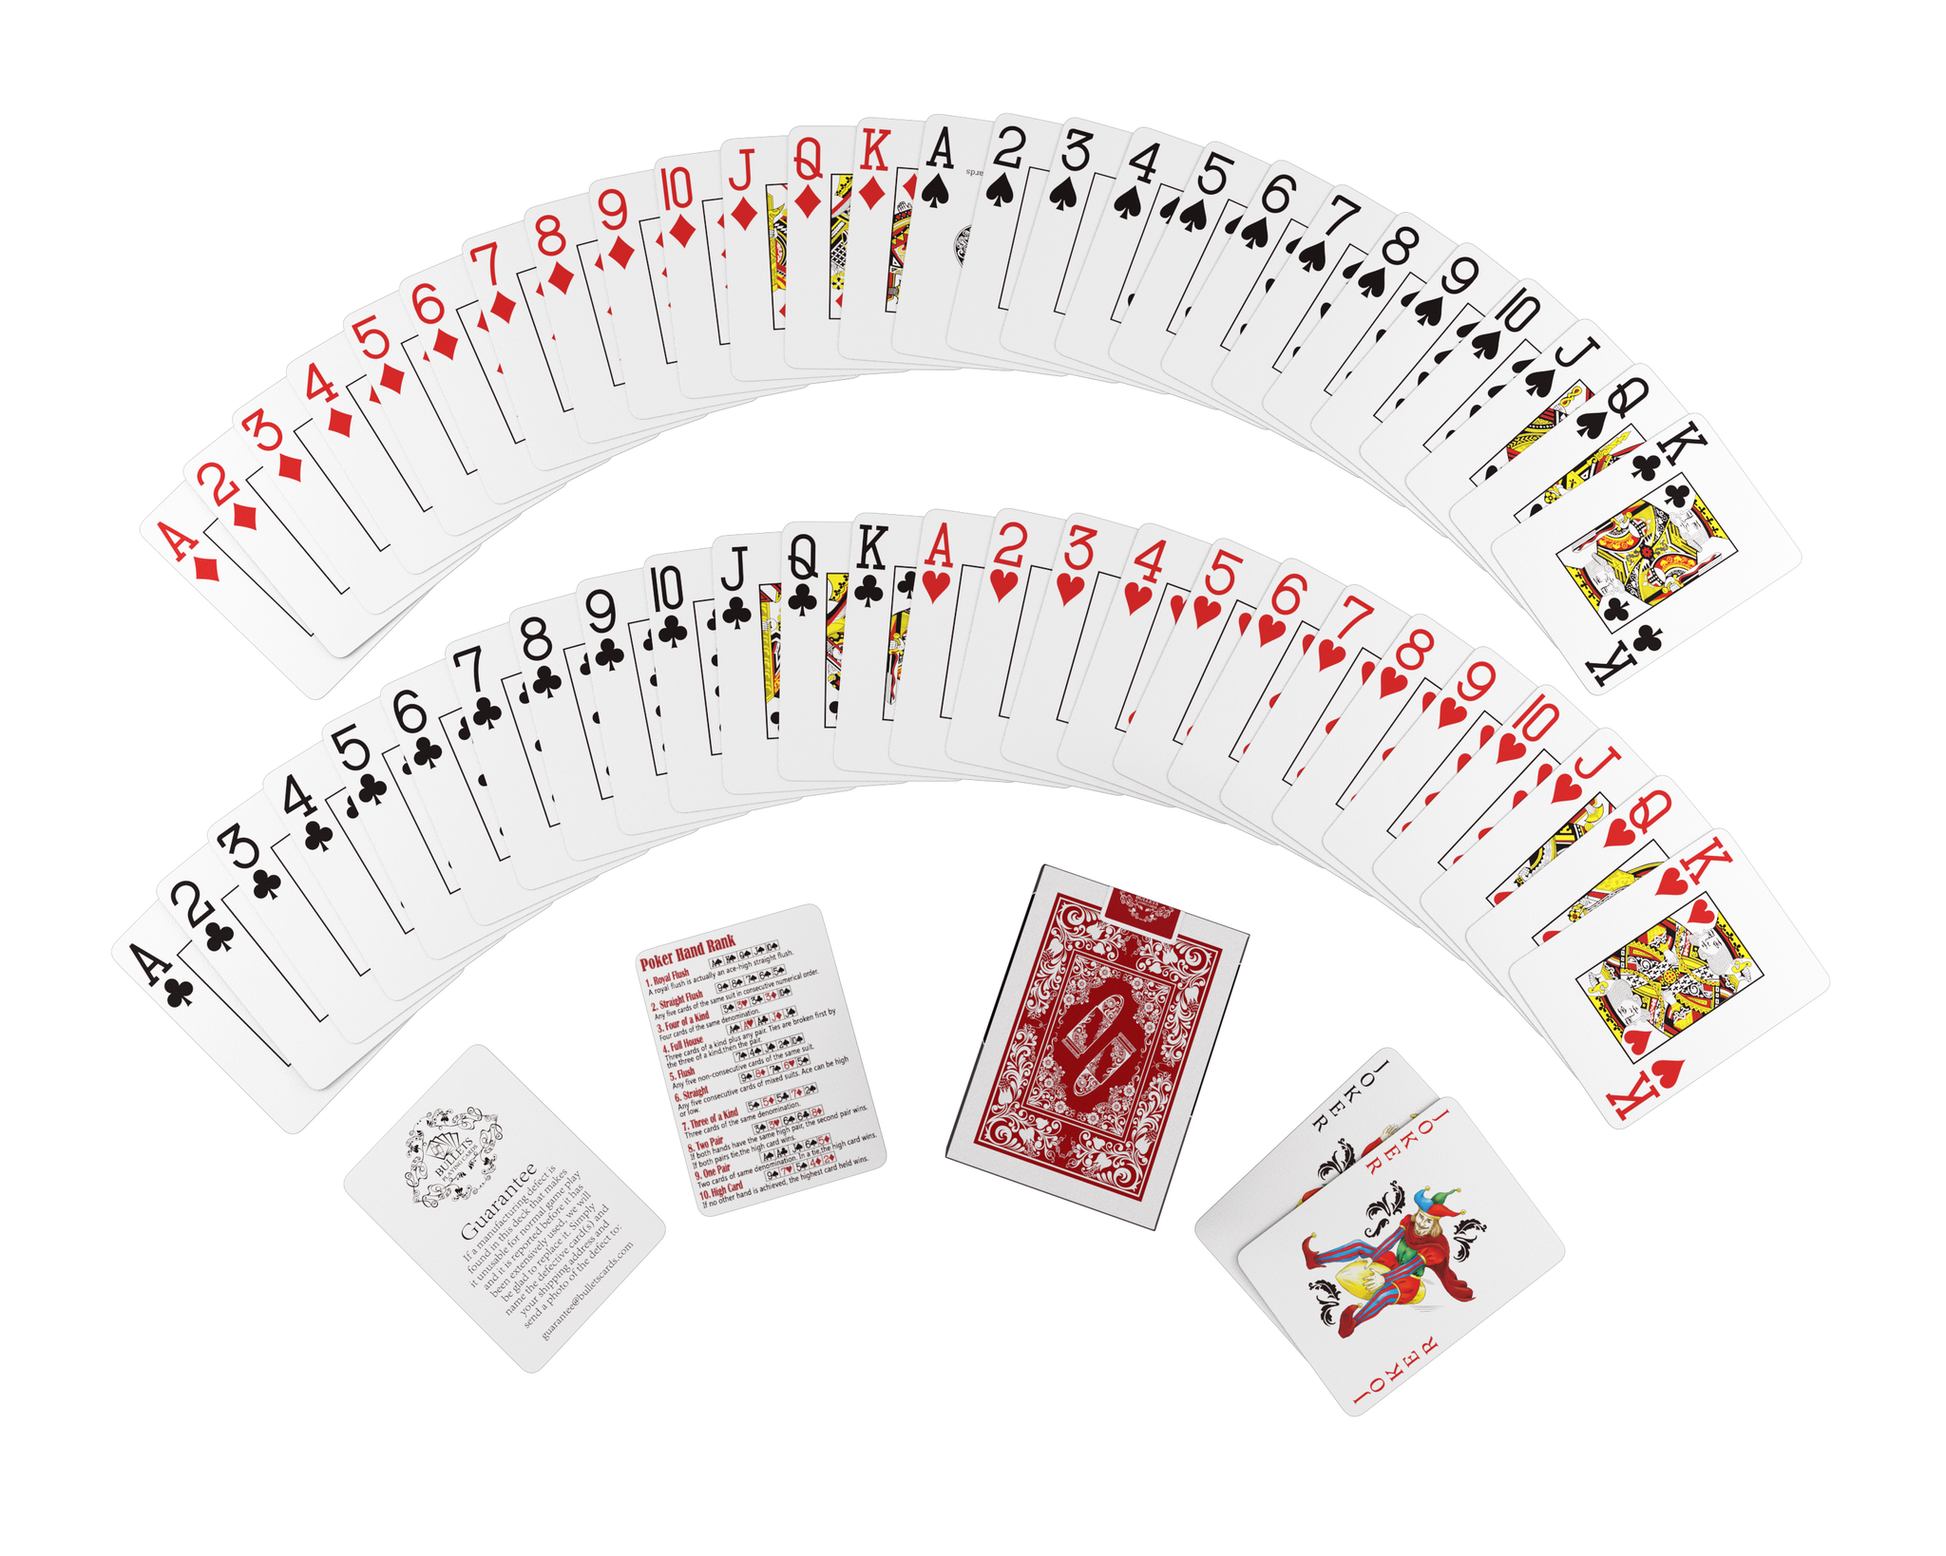 Bullets Poker Jumbo UV Marked Cards - Deck of playing cards with invisible markings under UV light, ideal for poker cheating devices and entertainment purposes.